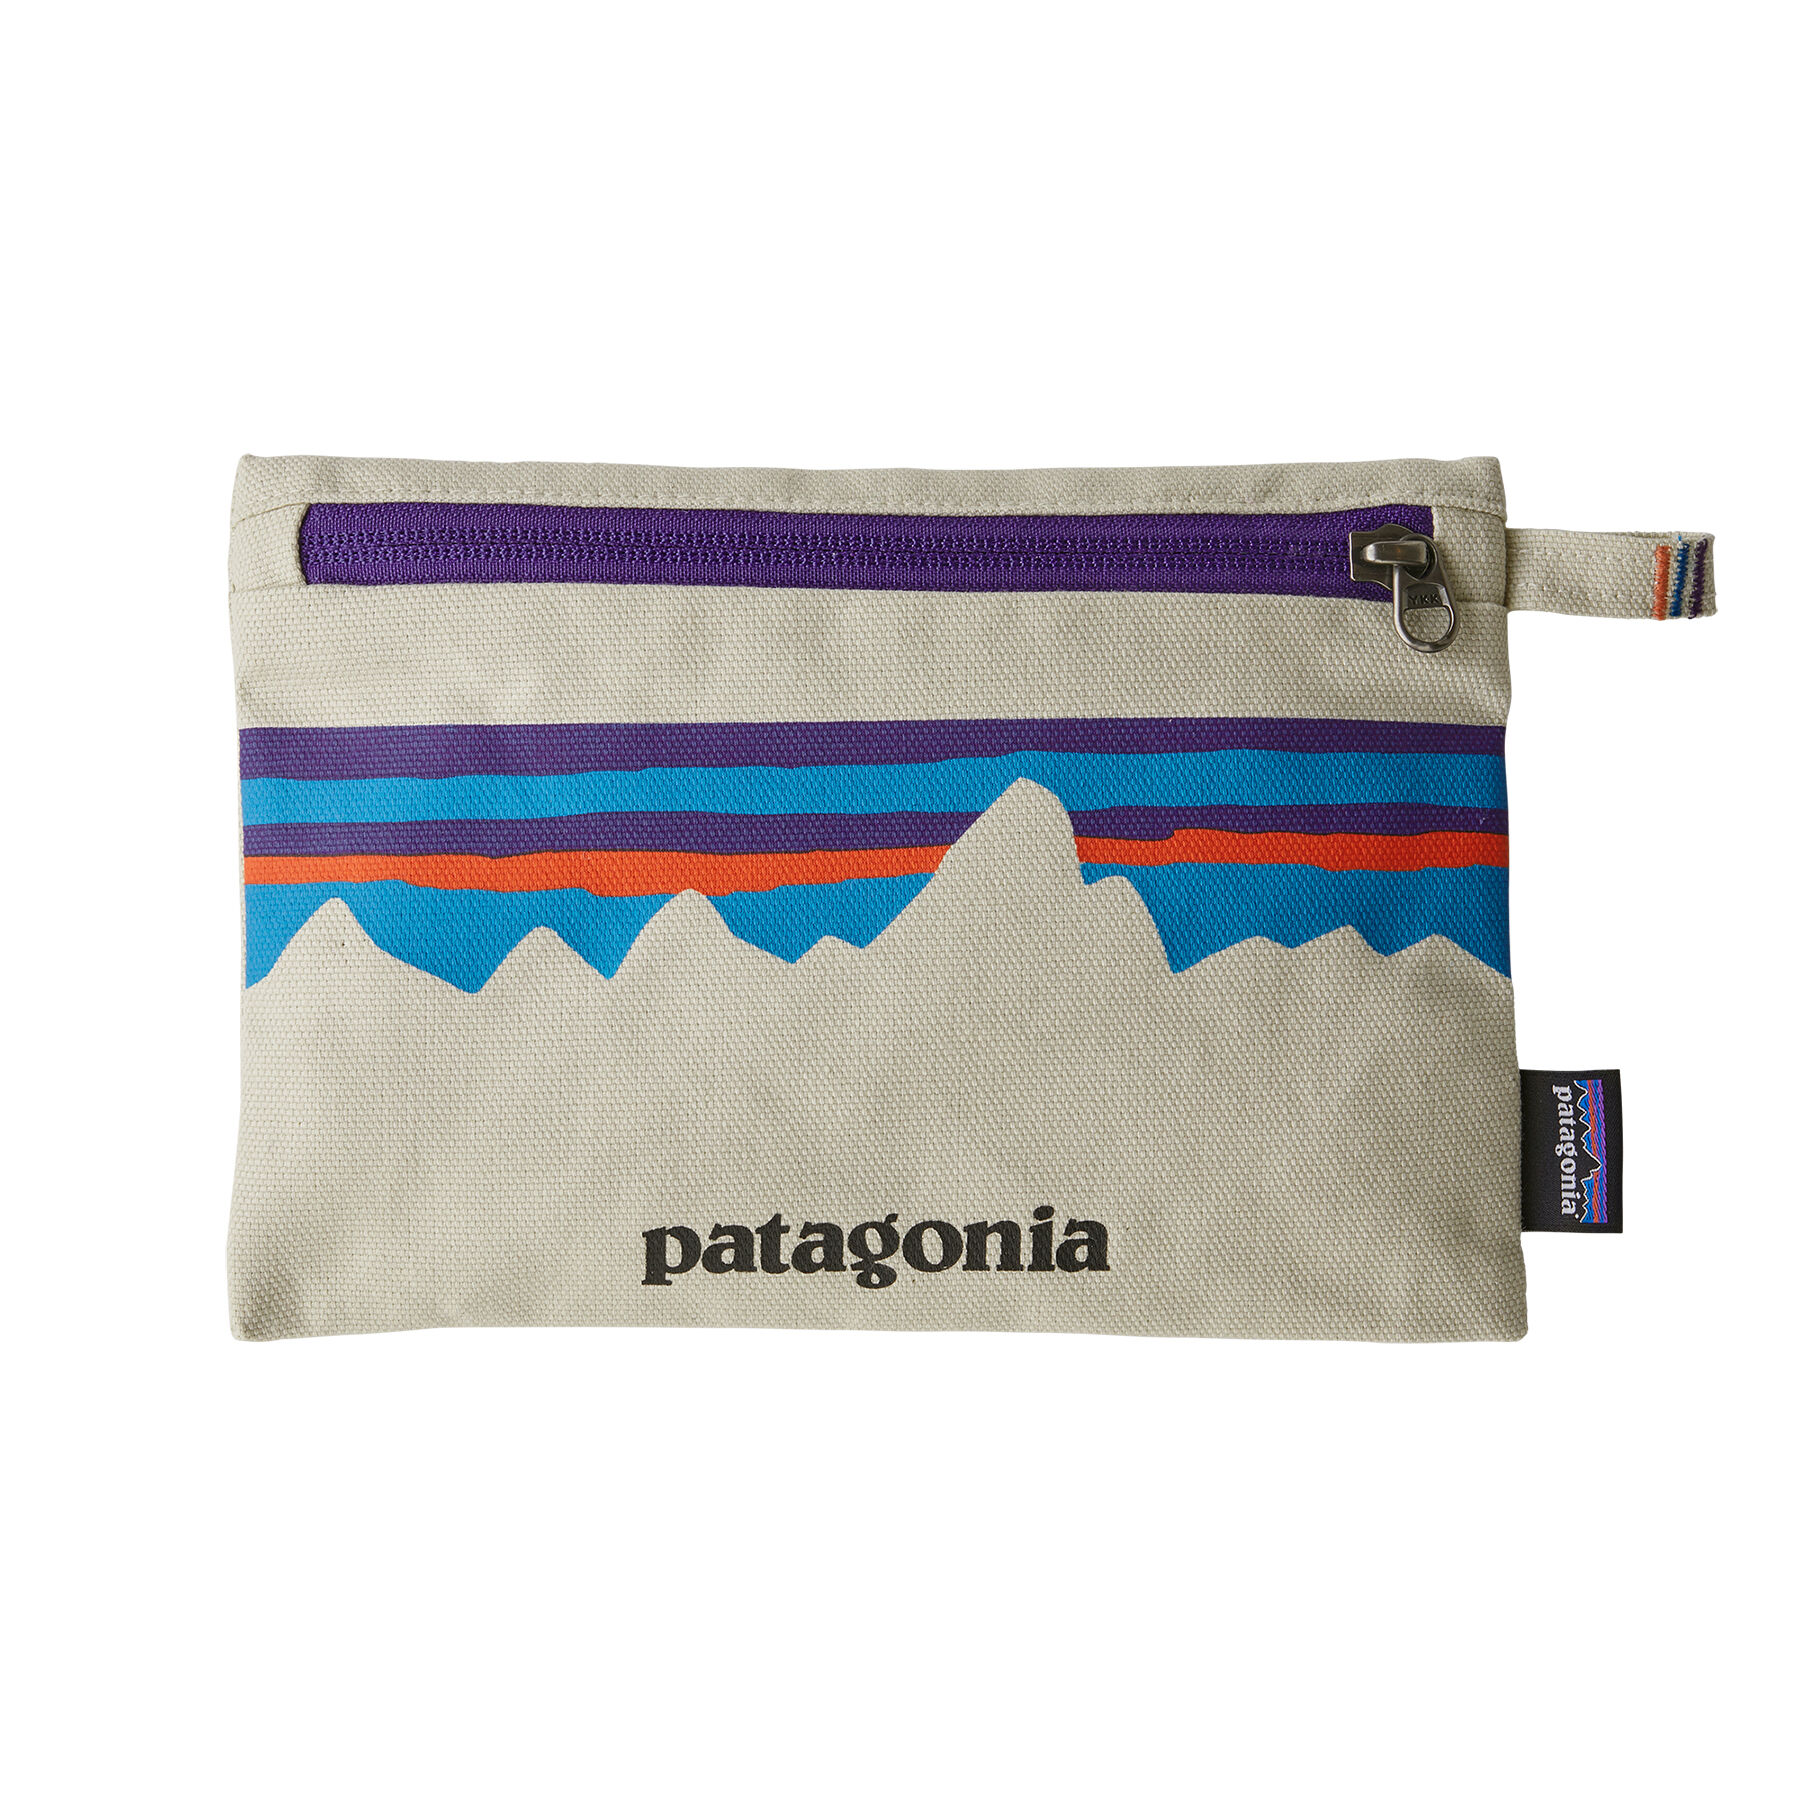 Patagonia Zippered Pouch - Taske